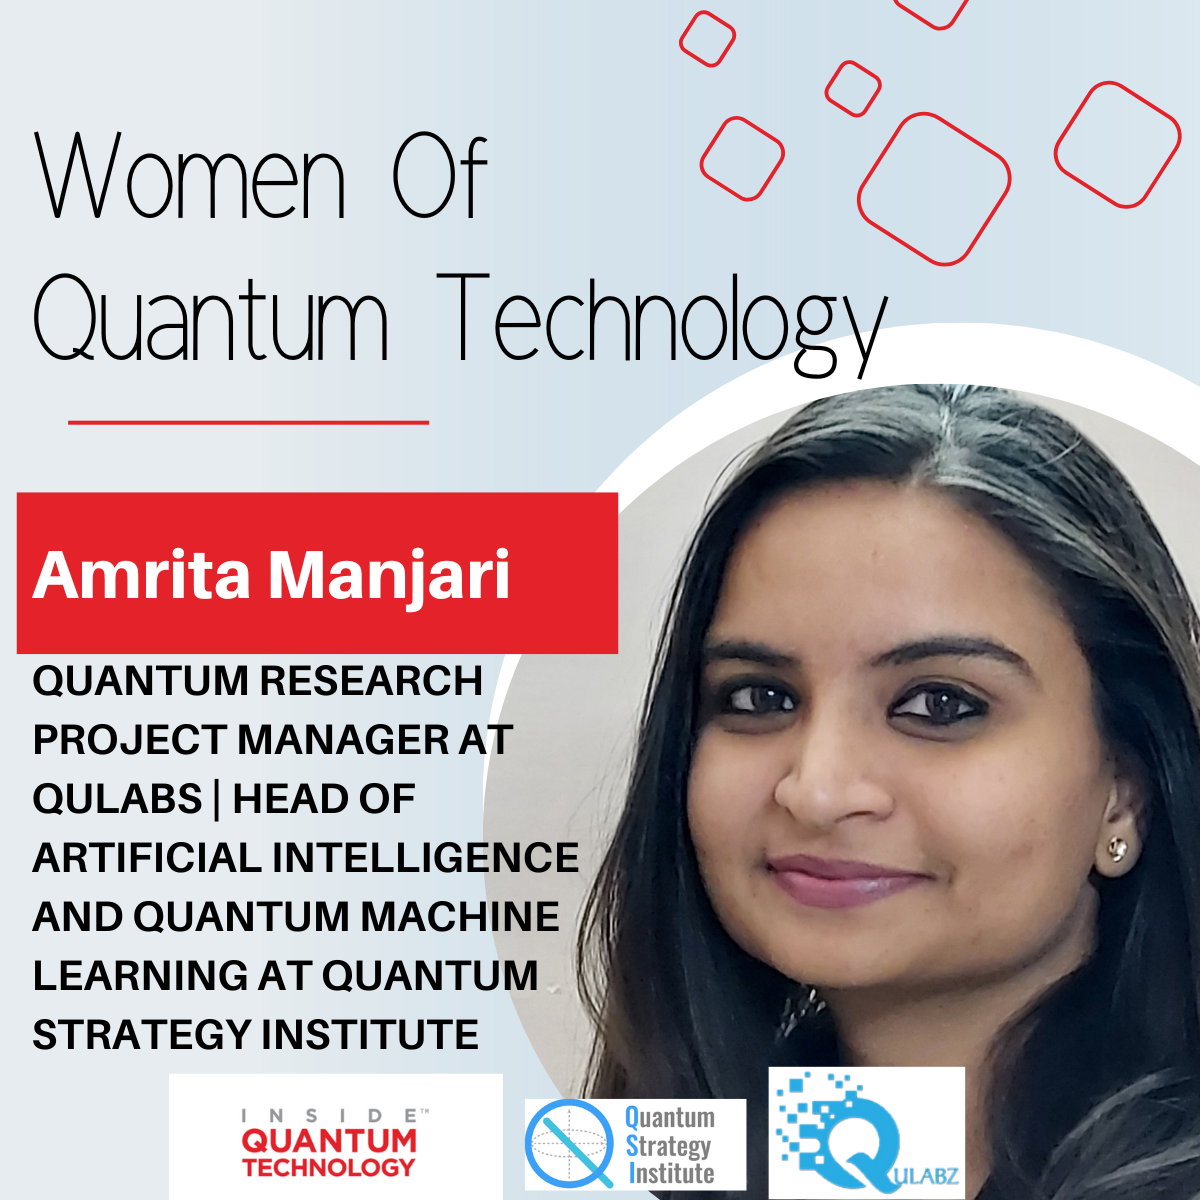 Amrita Manjari of Qulabs and the QSI discusses her transition into the quantum industry.